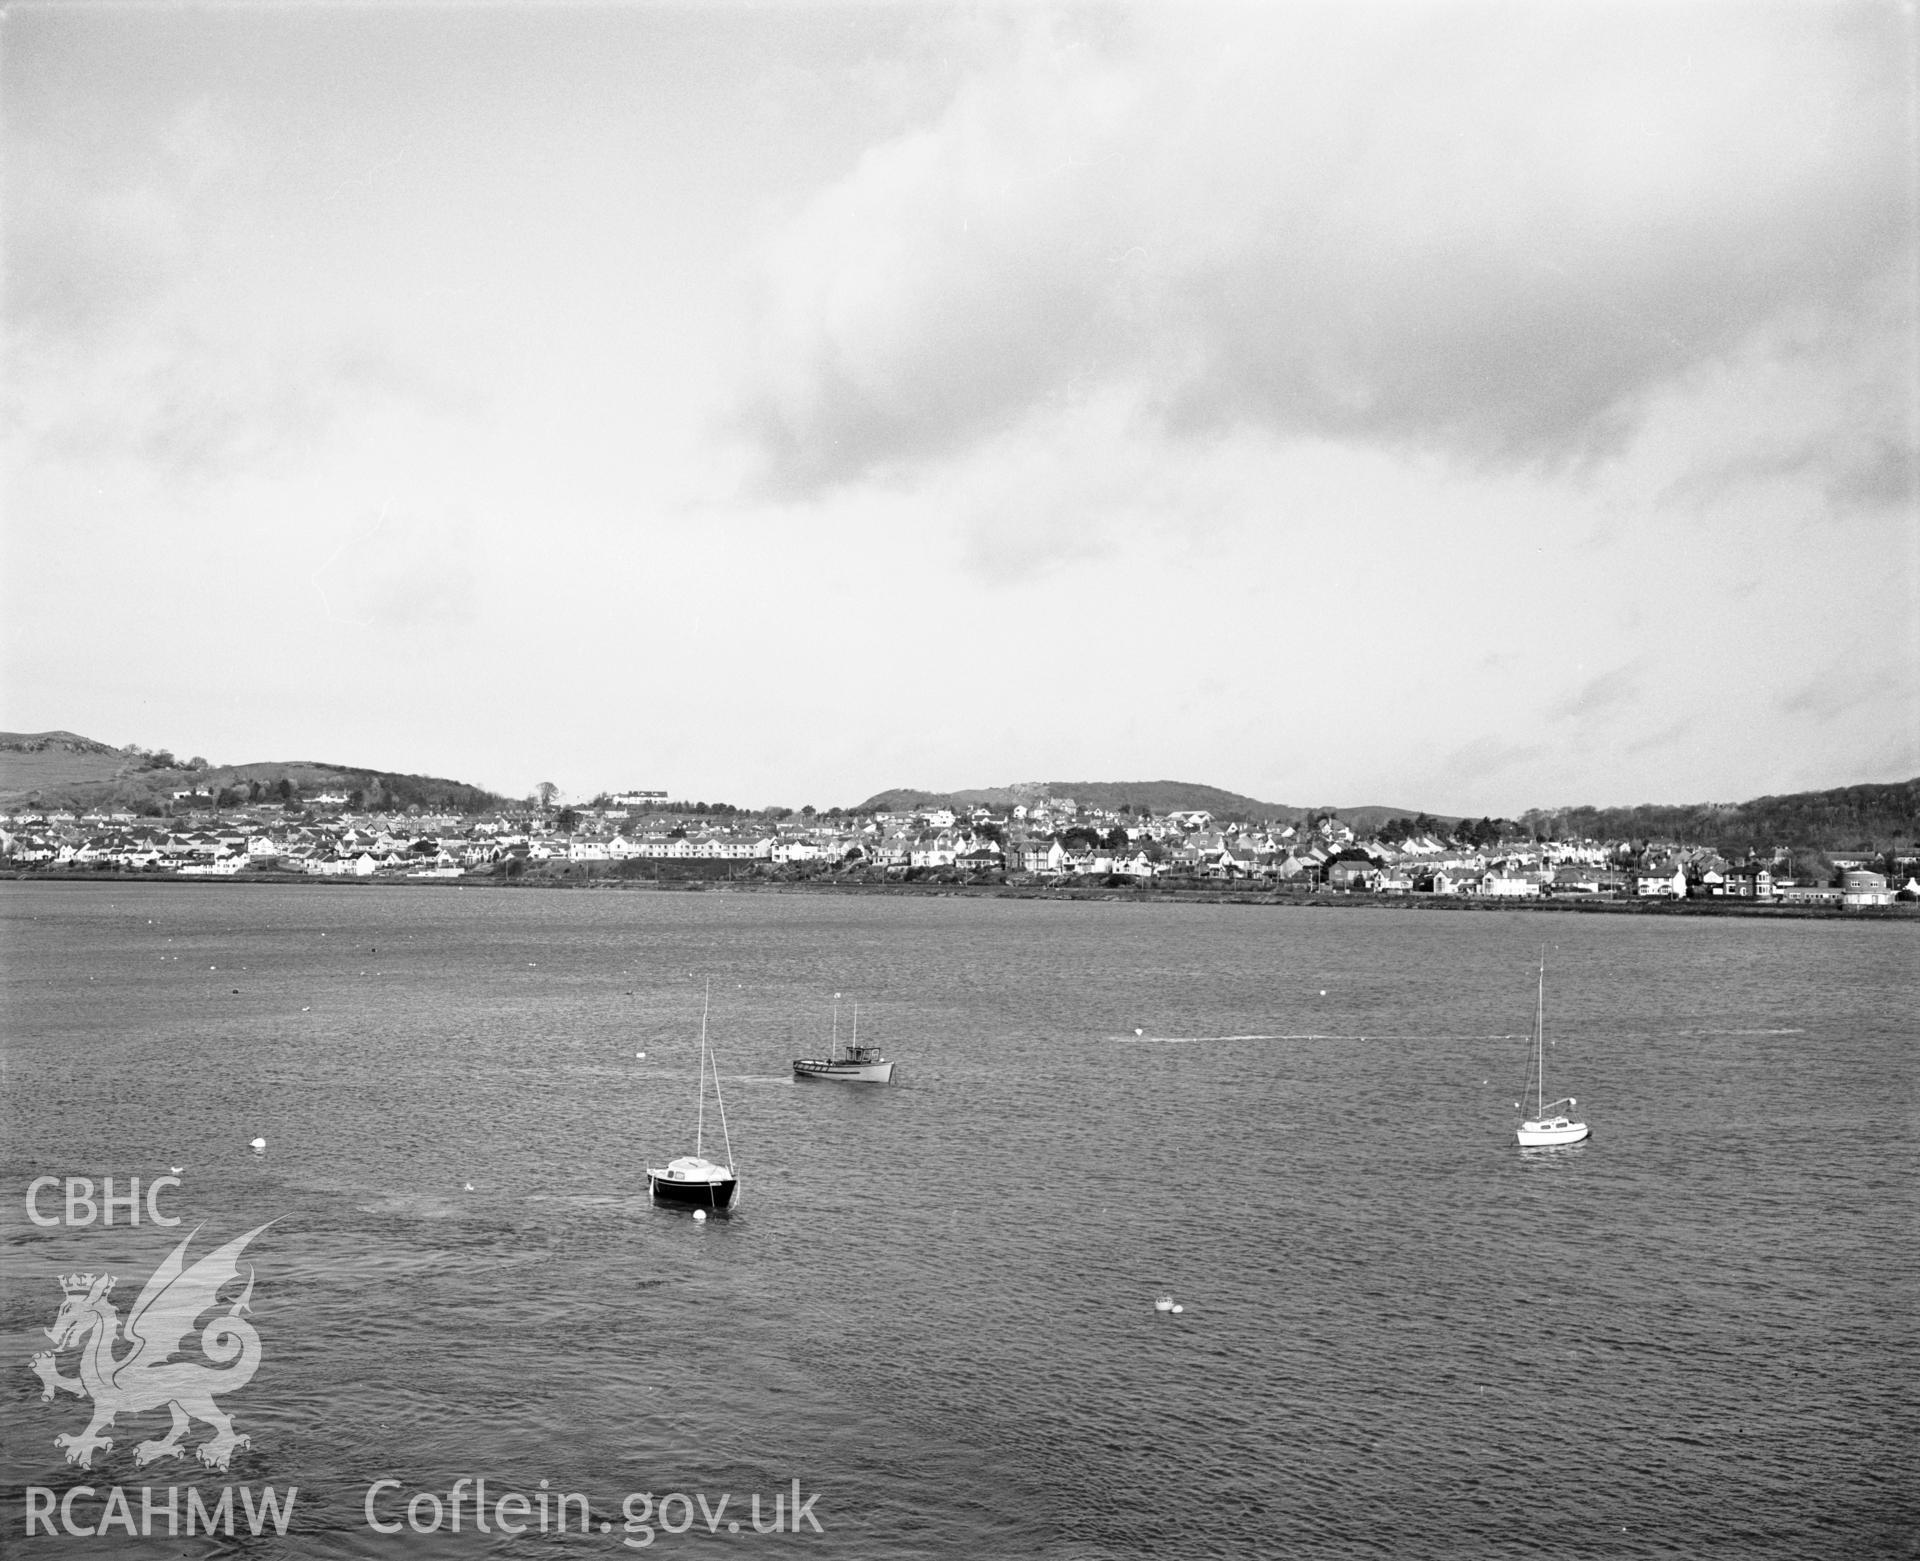 Photographic negative showing distant view of Conwy from the sea; collated by the former Central Office of Information.